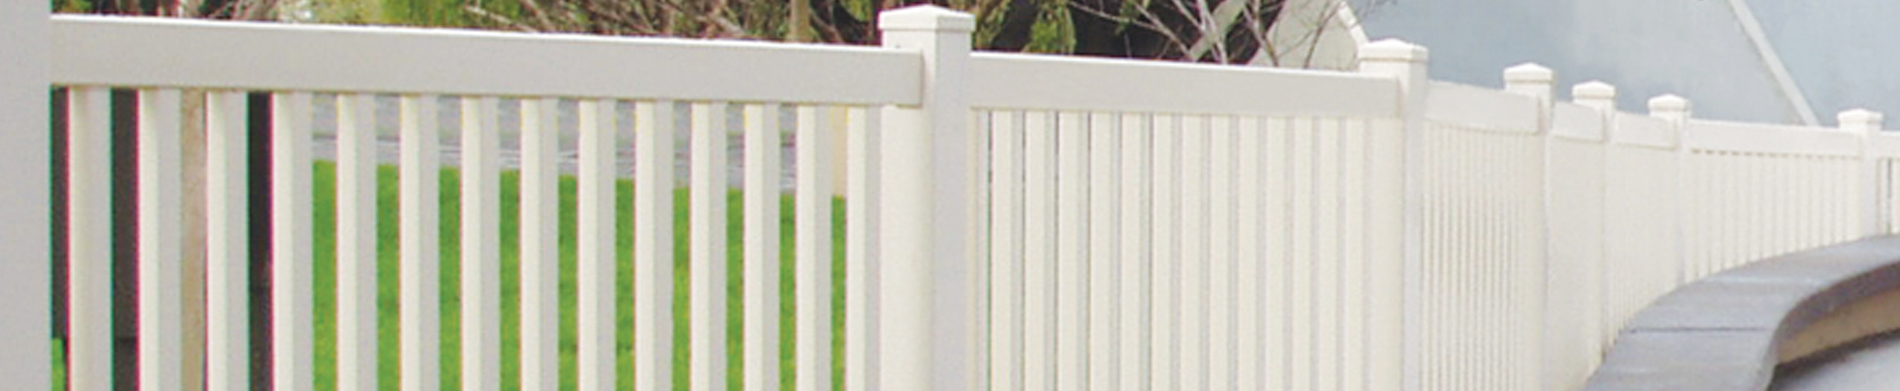 Perfect vinyl fences from Duramax that can turn your yard into a dream